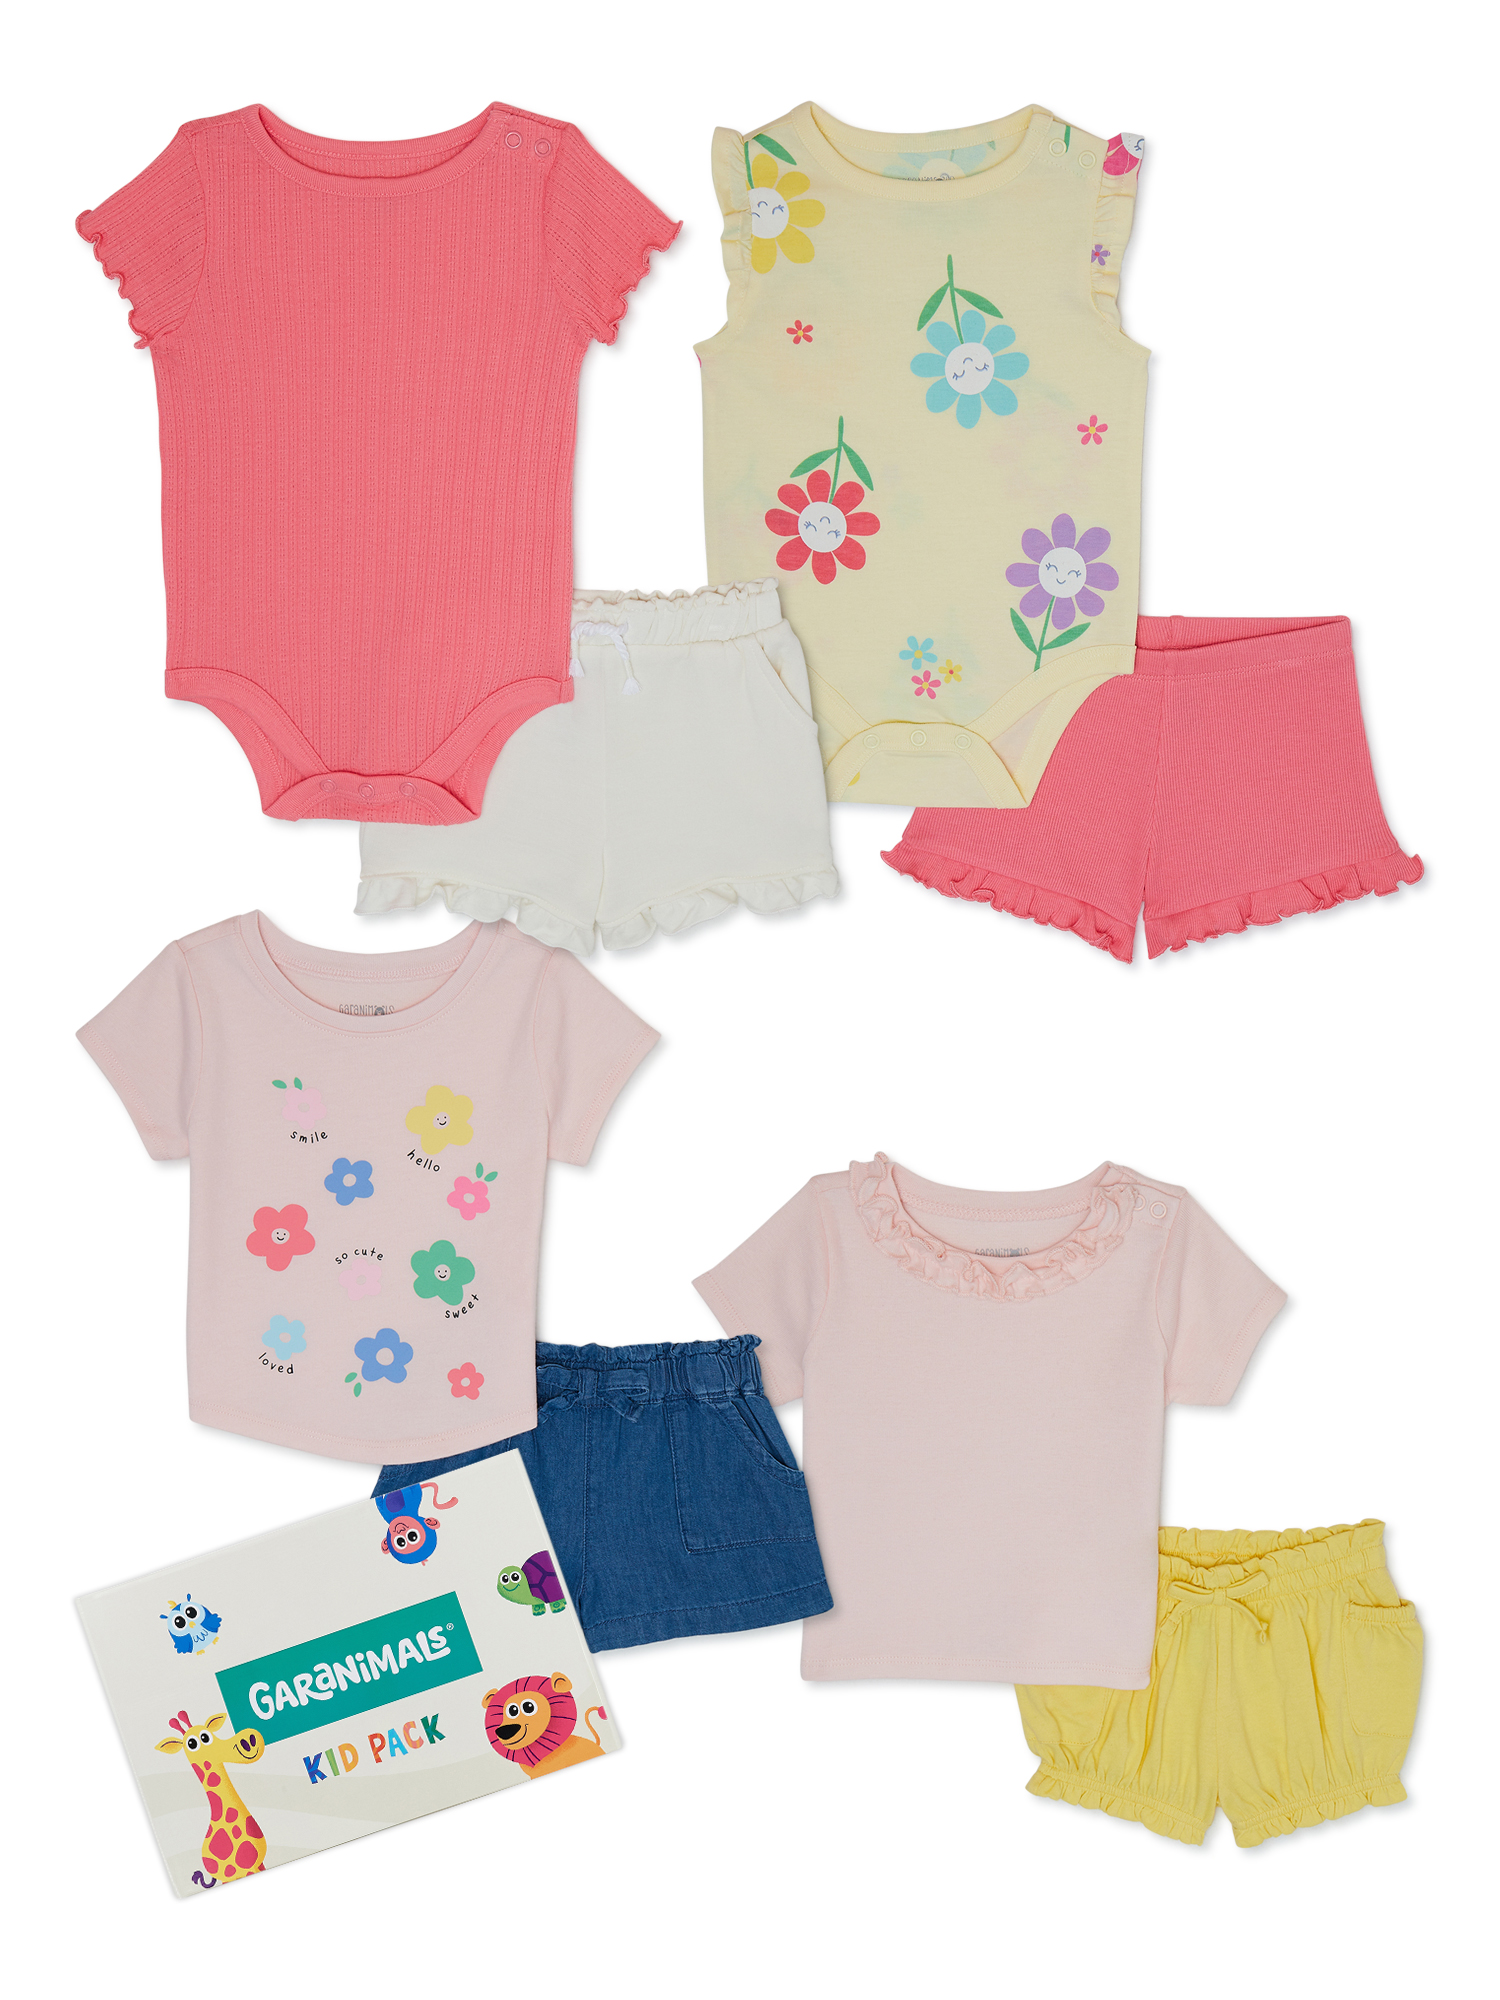 Garanimals Baby Girl Mix and Match Outfit Kid-Pack, 8-Piece, Sizes 0-24 Months - image 1 of 7